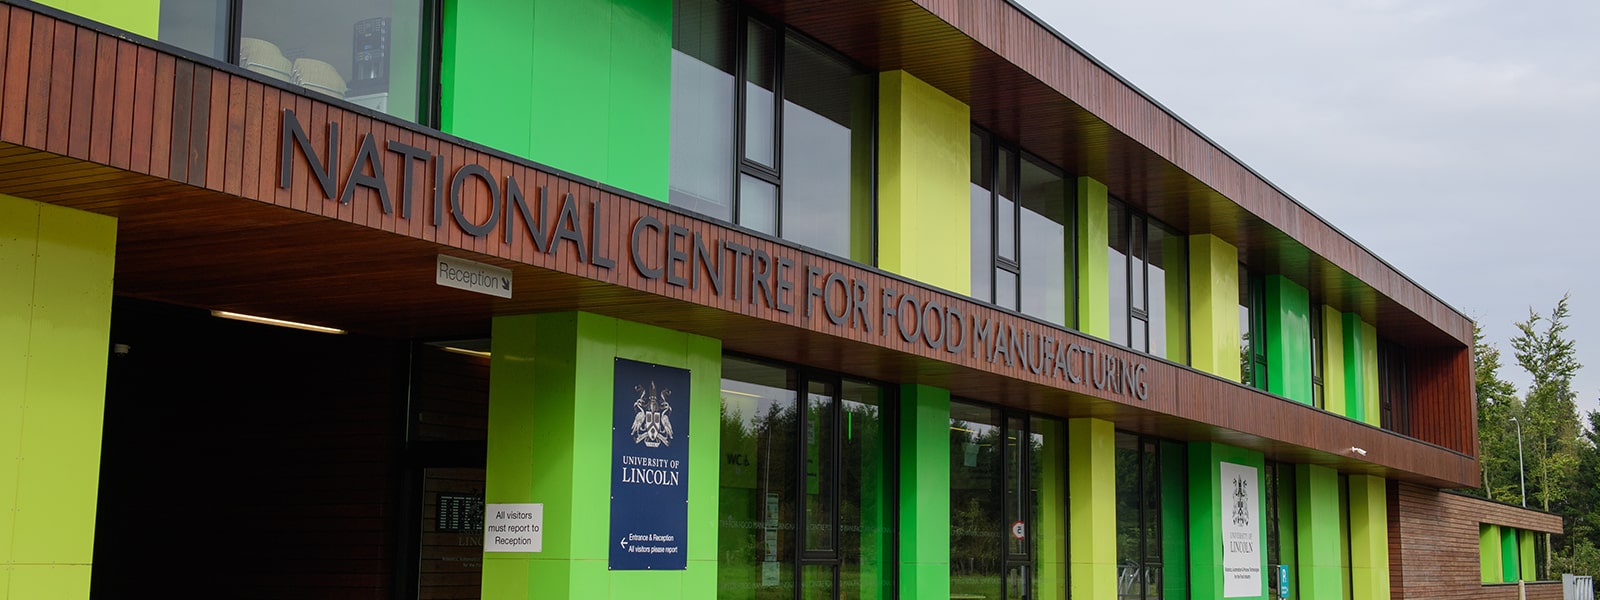 National Centre for Food Manufacturing - University of Lincoln